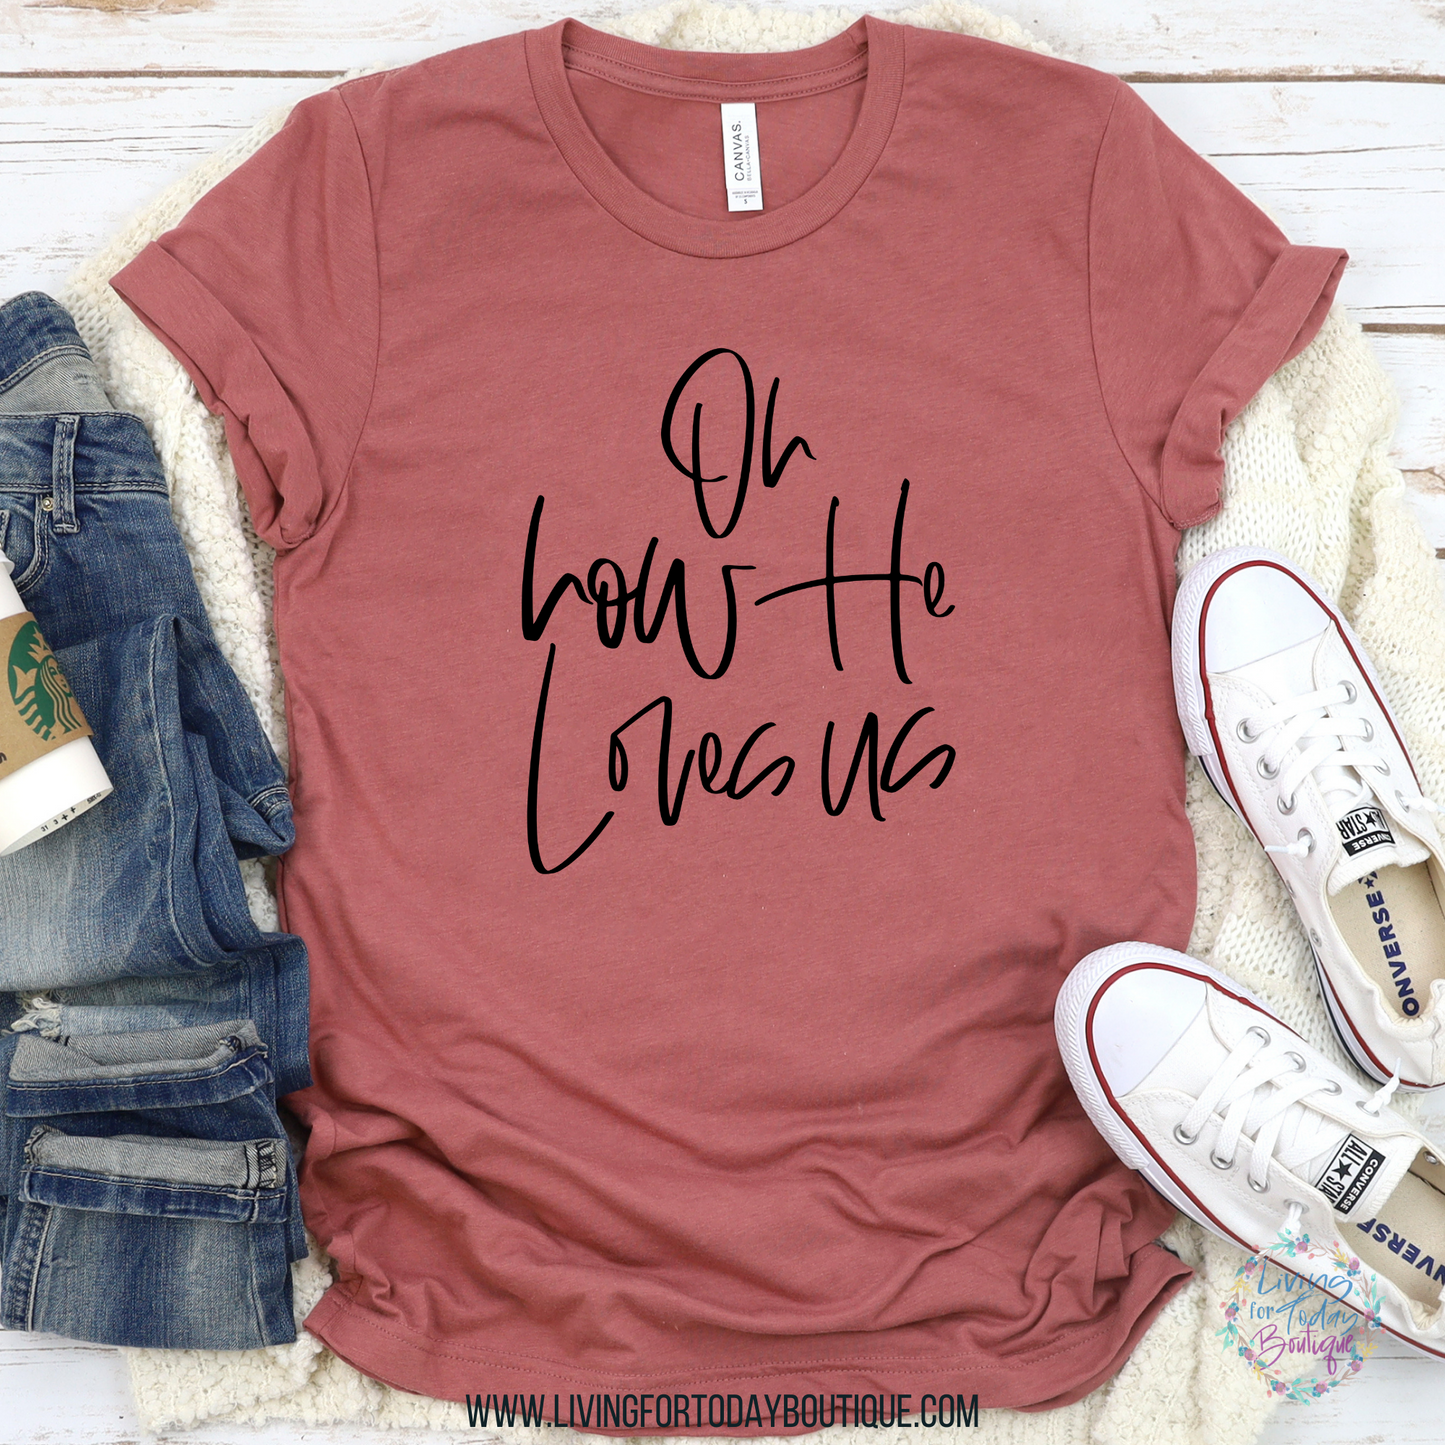 Oh How He Loves Us Graphic Tee